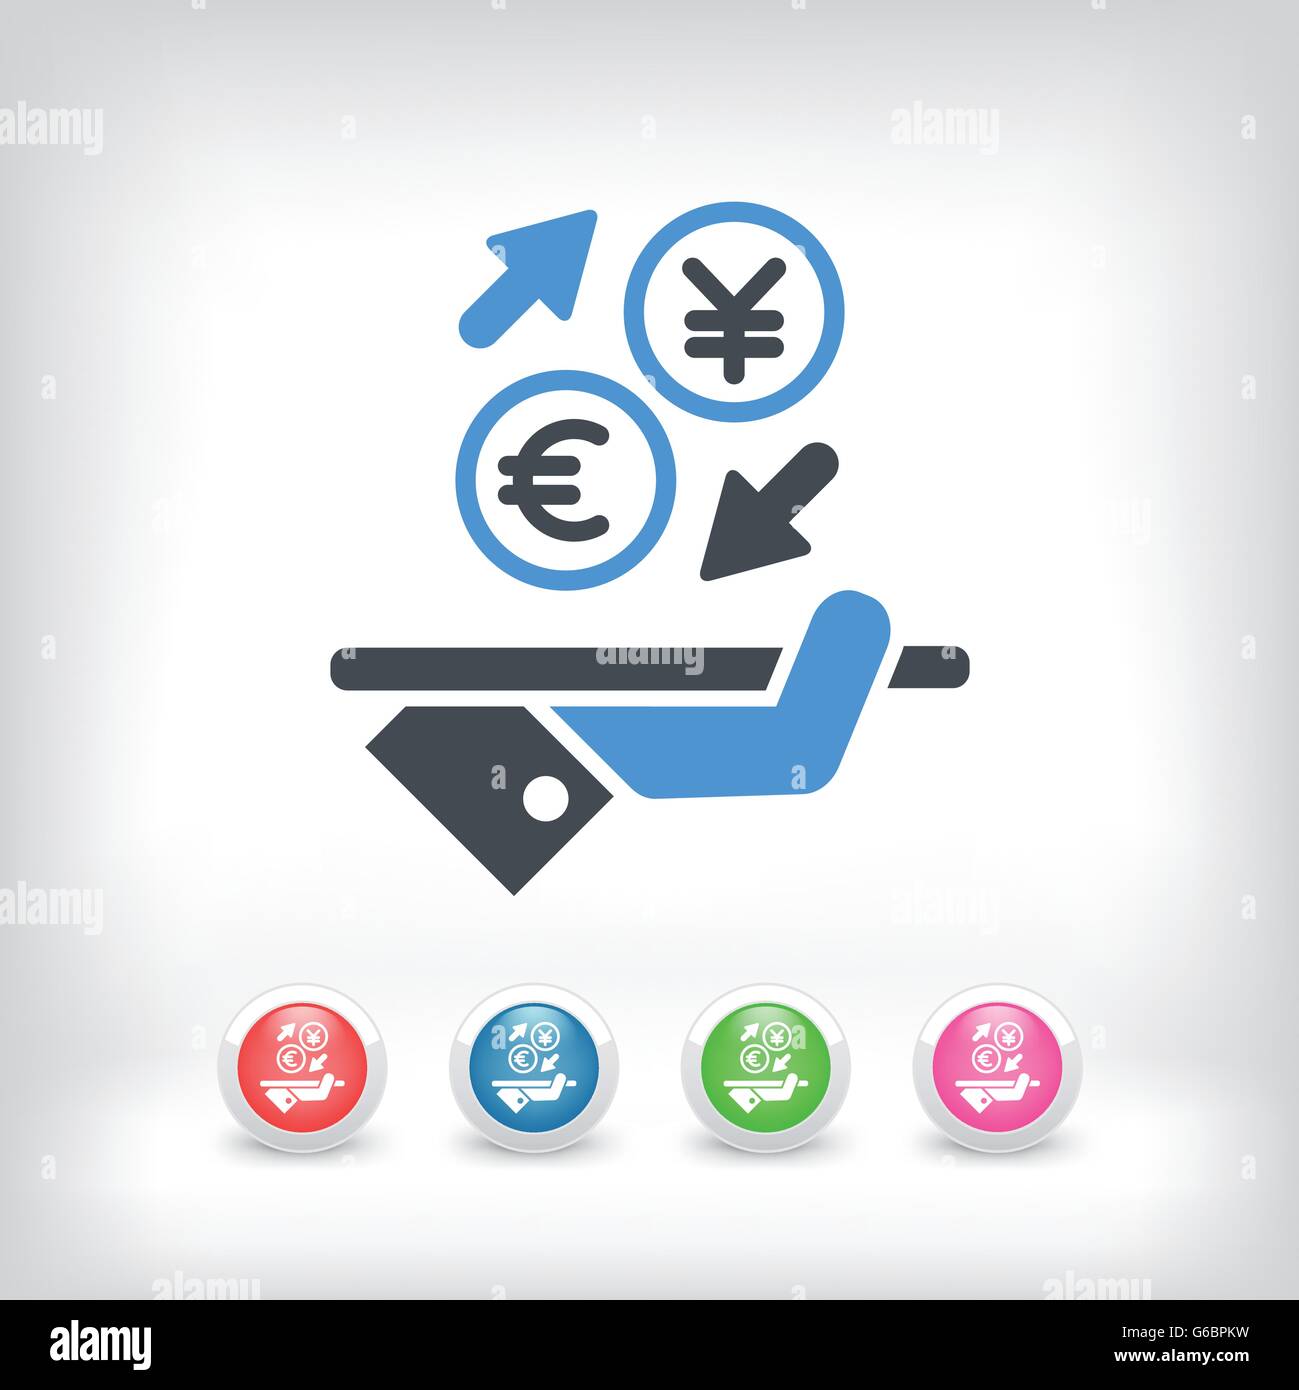 Euro/Yuan - Foreign currency exchange icon Stock Vector